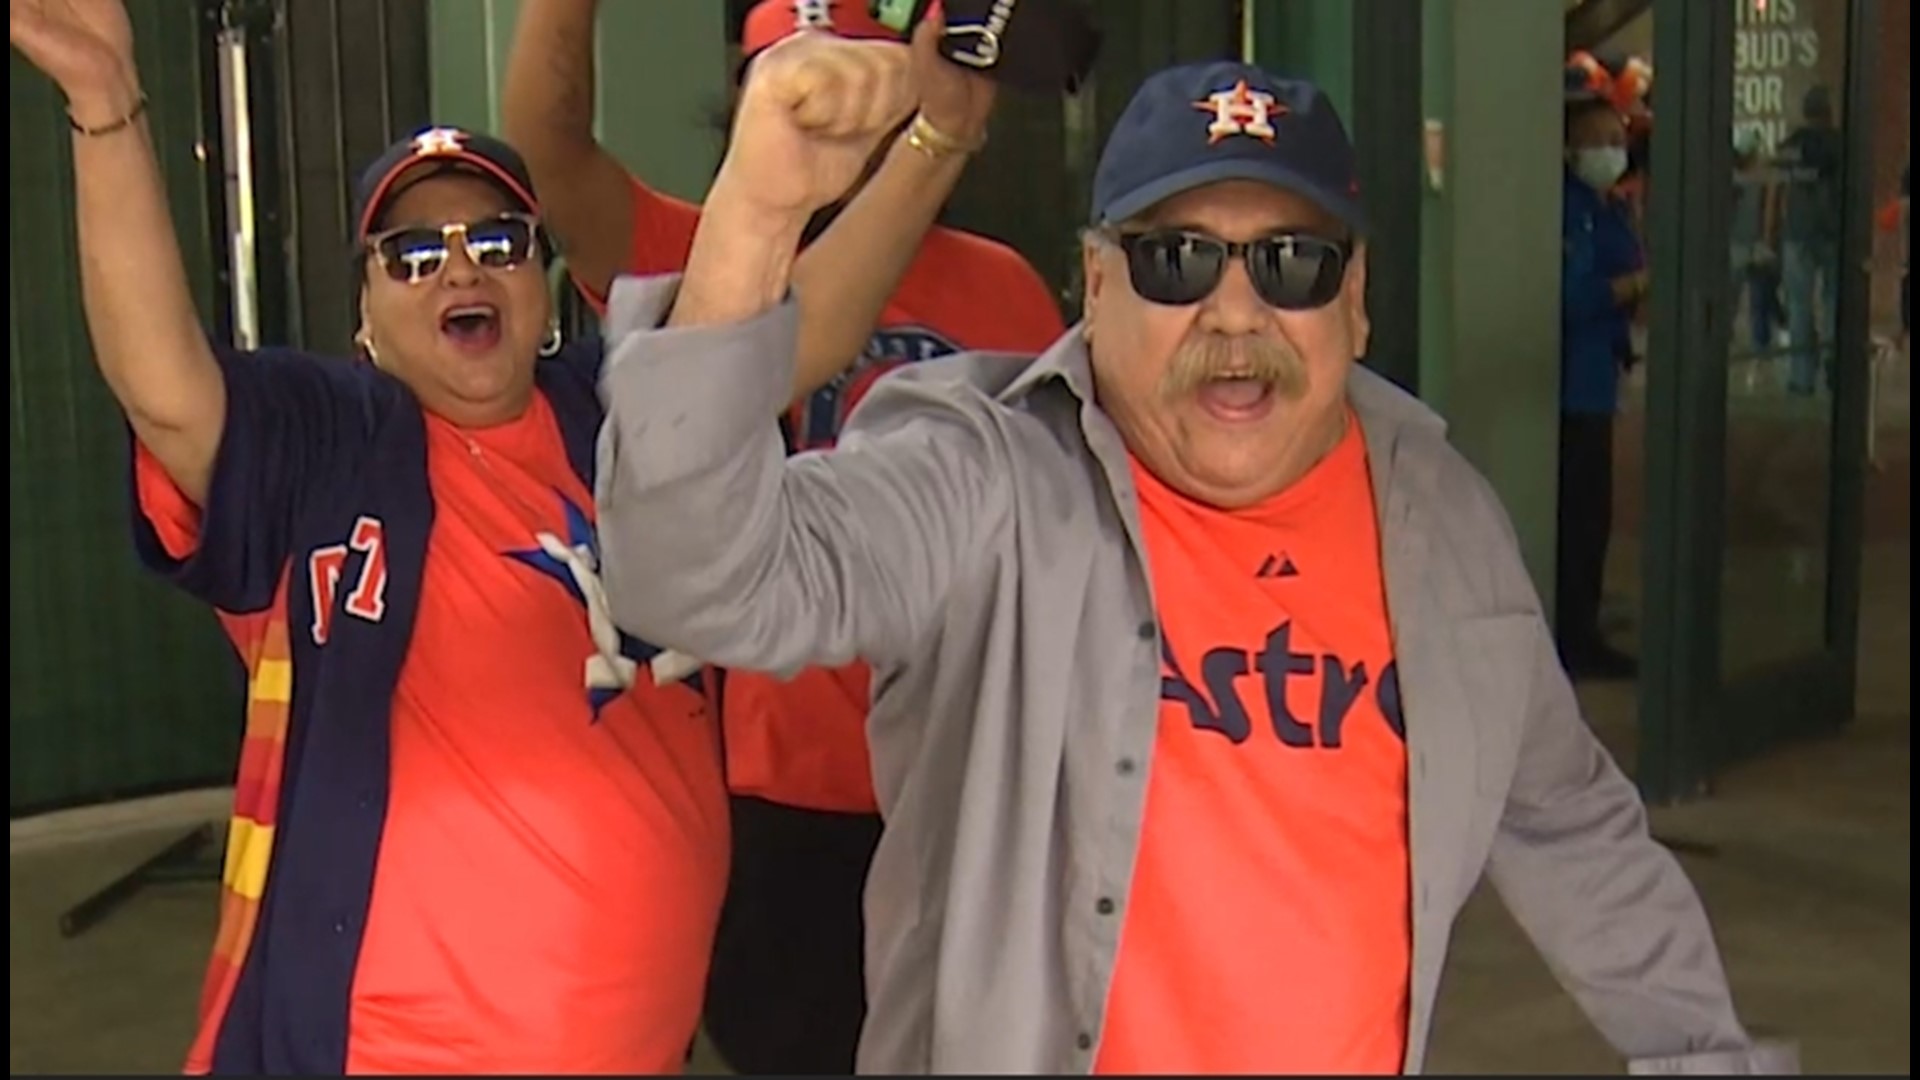 It's the start of a new season, and that means Astros fans descended on the ballpark to get it started right.